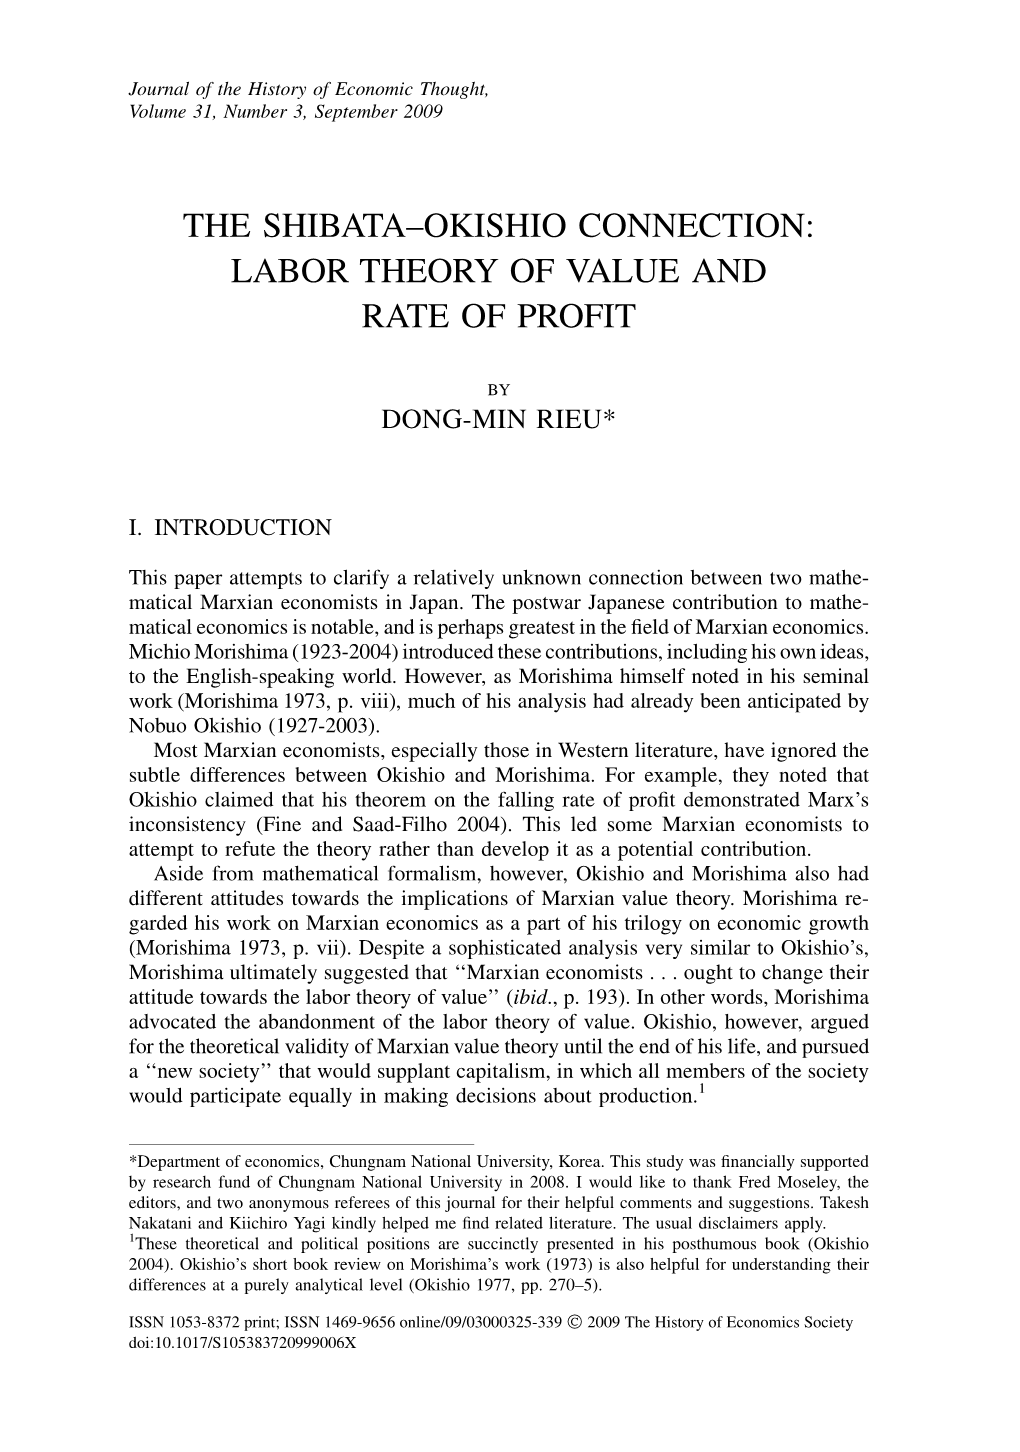 The Shibata–Okishio Connection: Labor Theory of Value and Rate of Profit